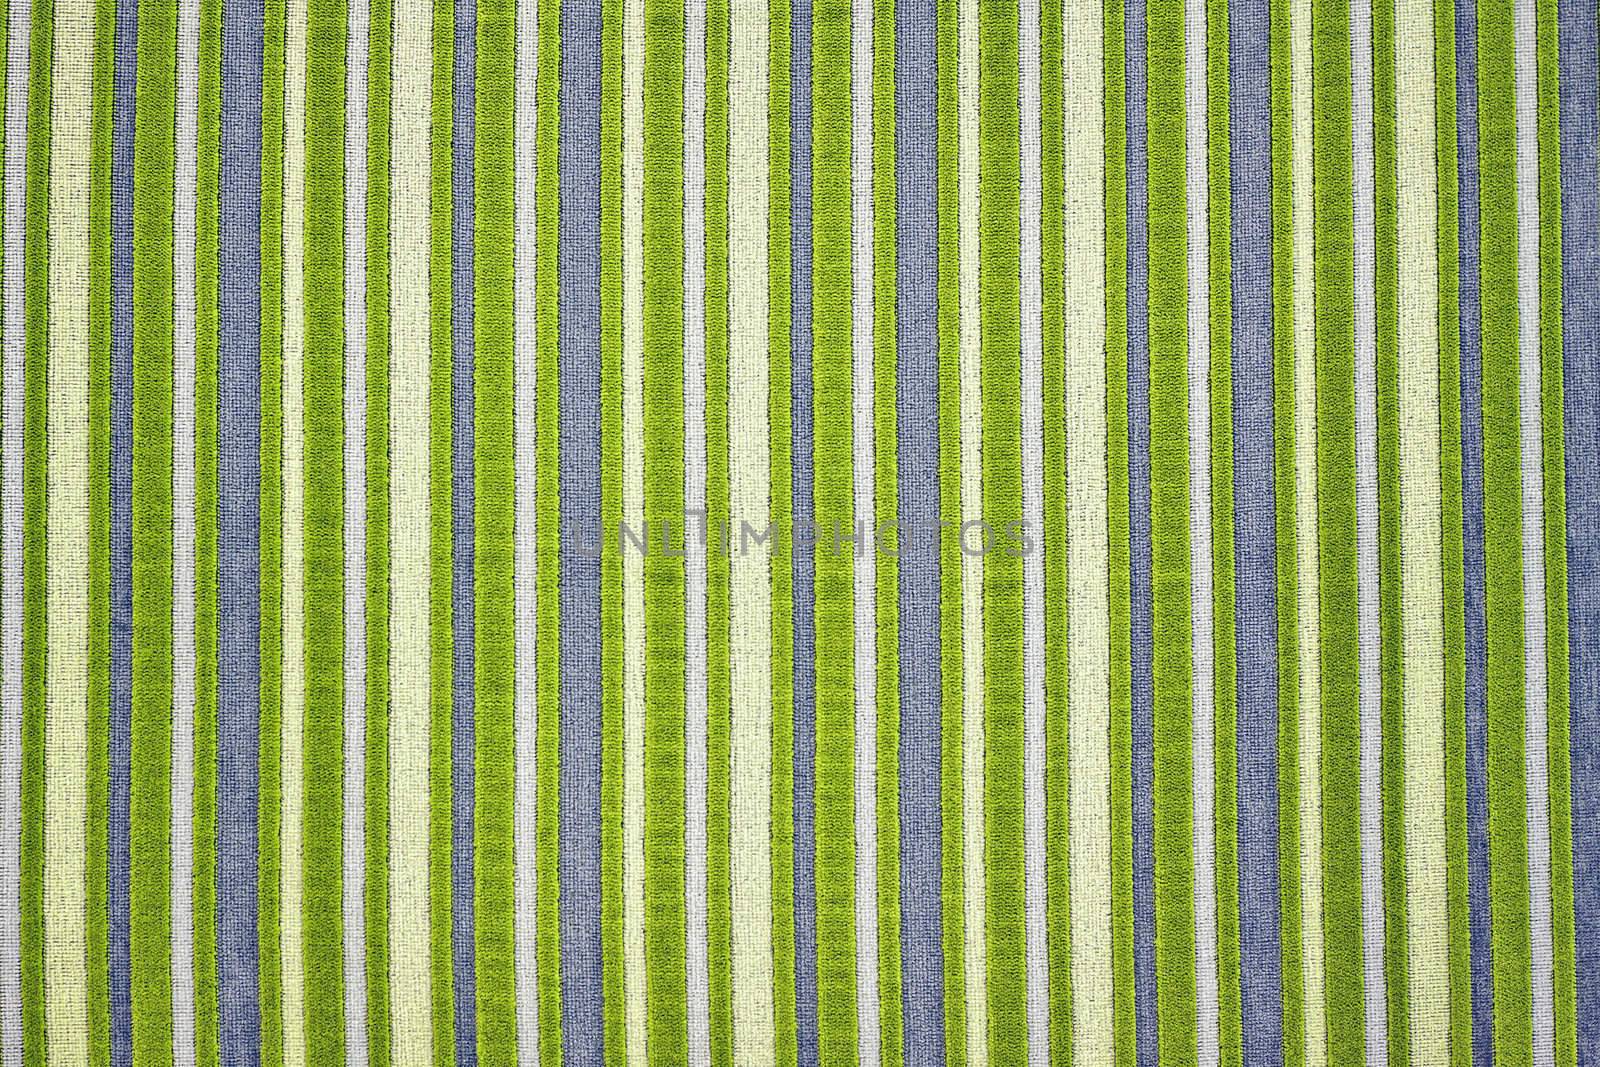 A funky green striped background or texture